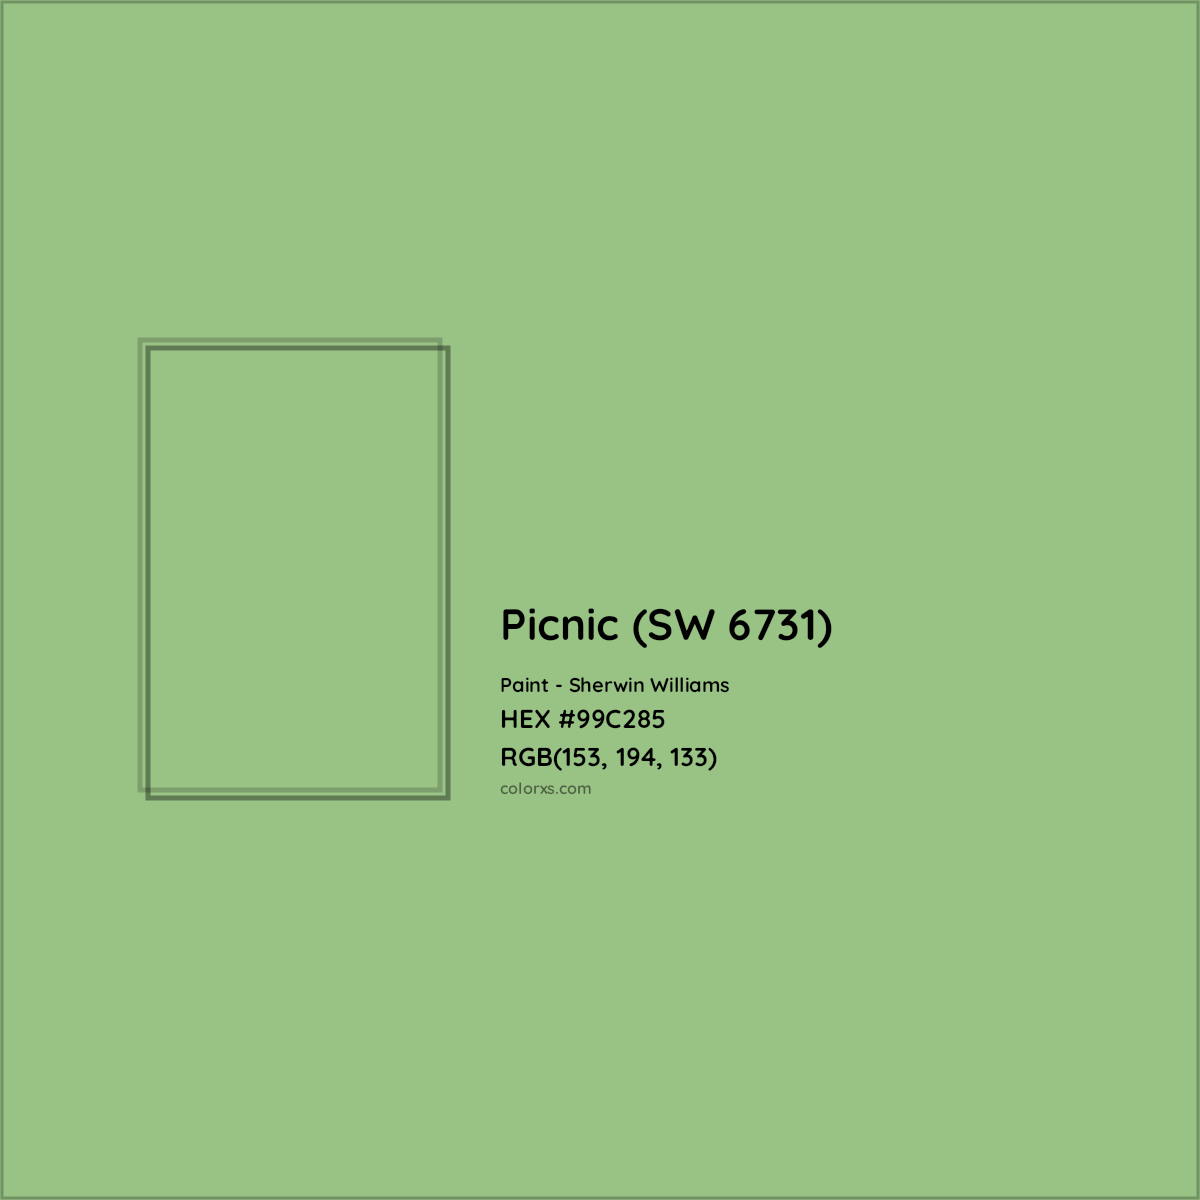 HEX #99C285 Picnic (SW 6731) Paint Sherwin Williams - Color Code